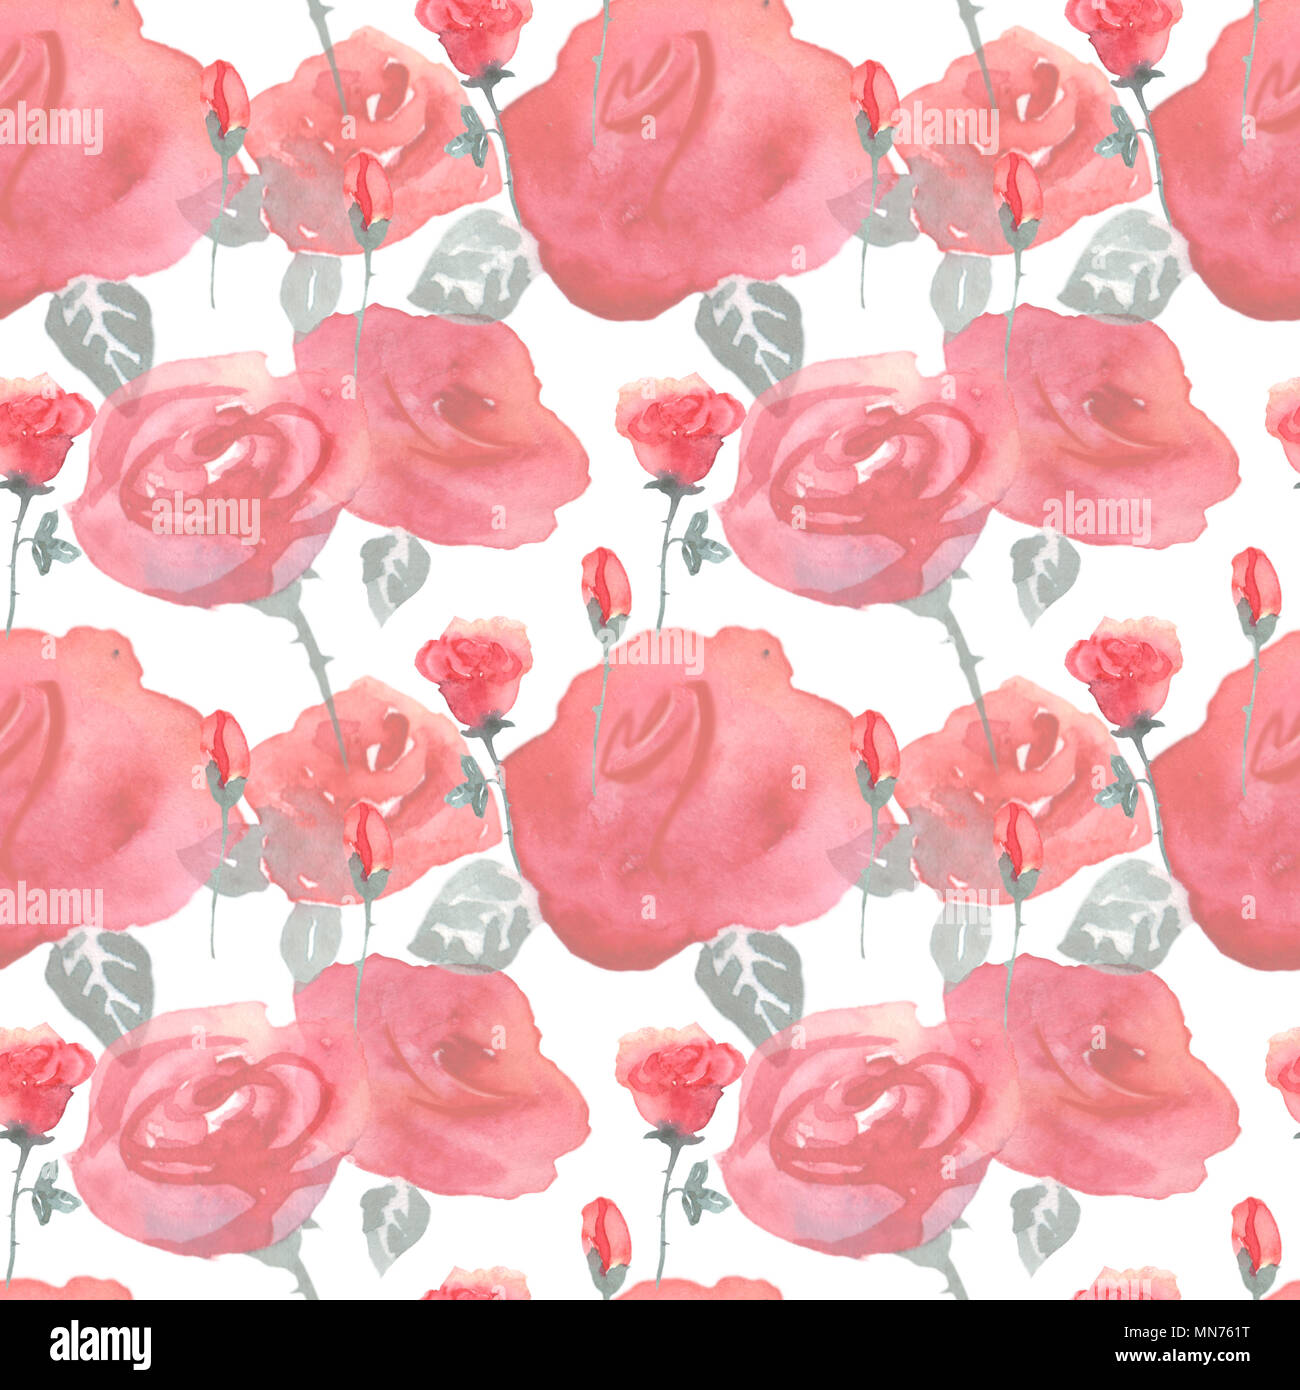 Roses flowers and buds pink blue vintage seamless pattern background for textile Stock Photo